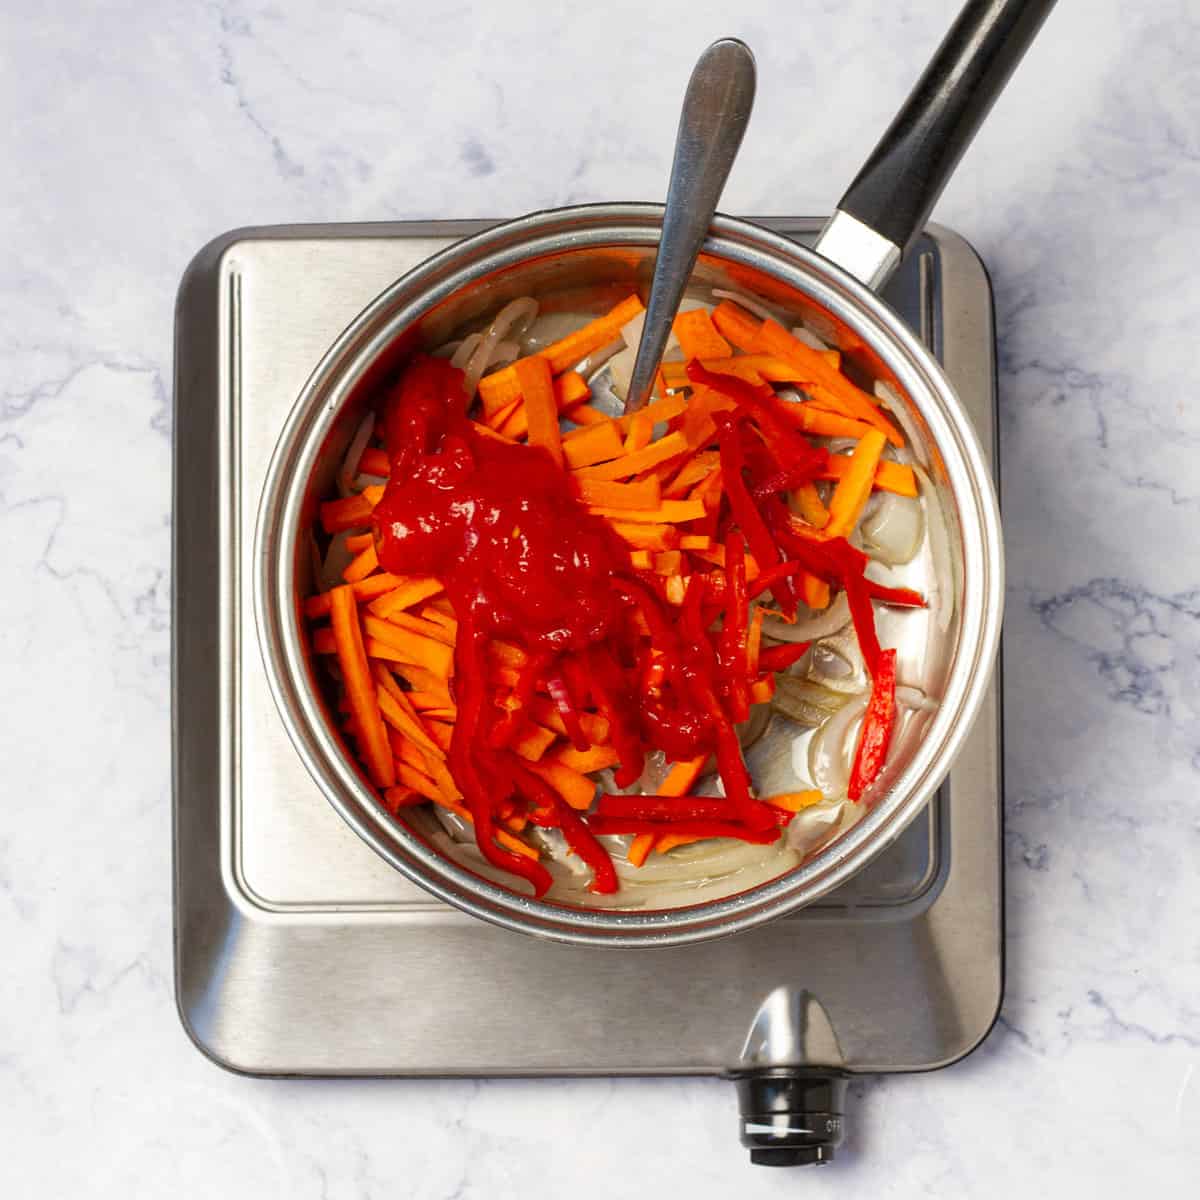 Cooking sliced onion, red bell pepper, and carrot